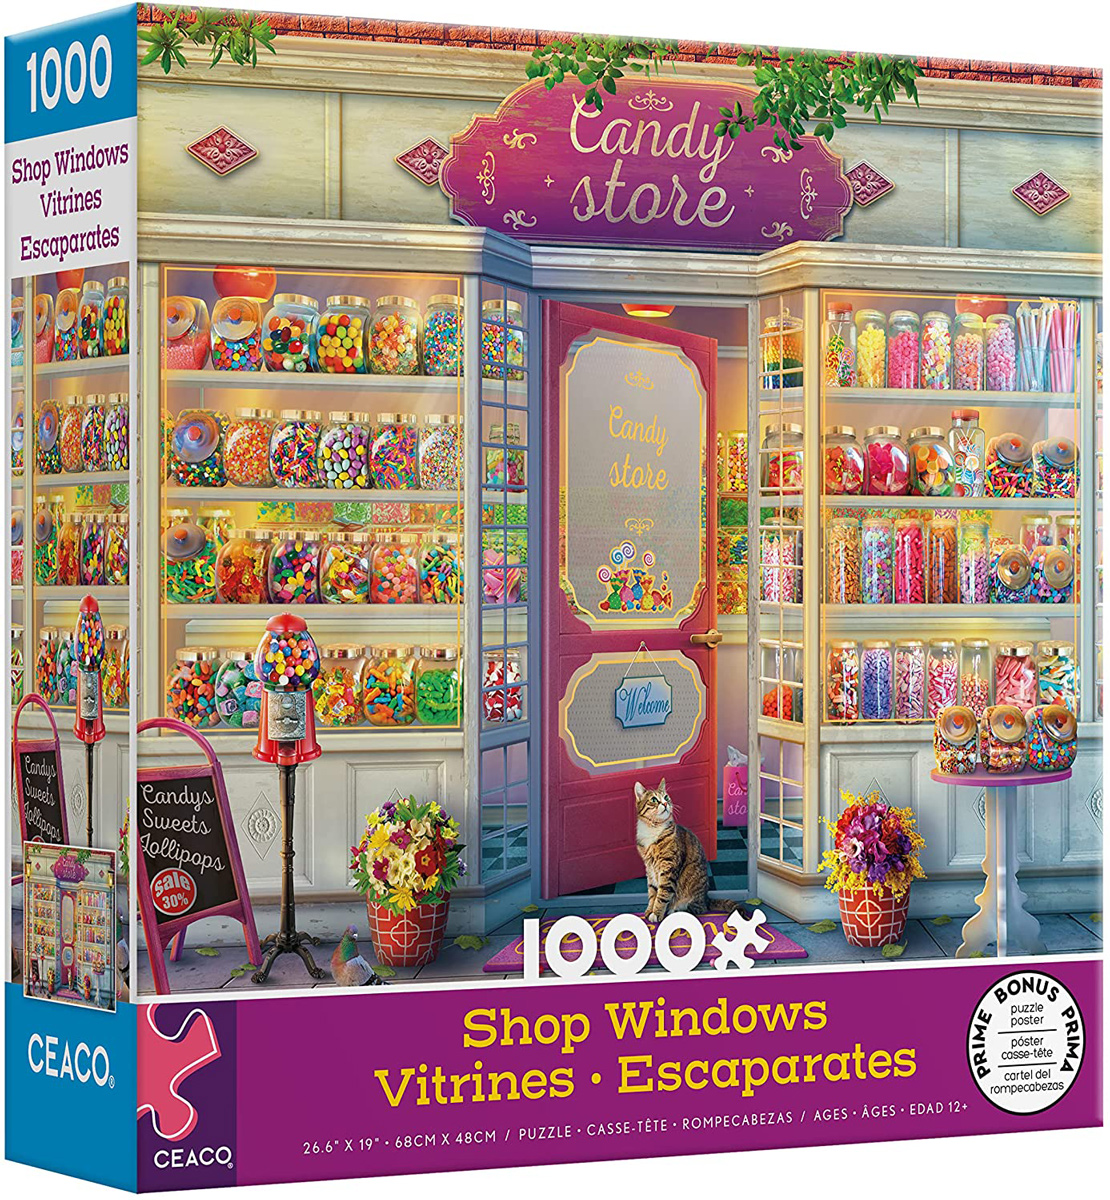 Shop Windows - Candy Store